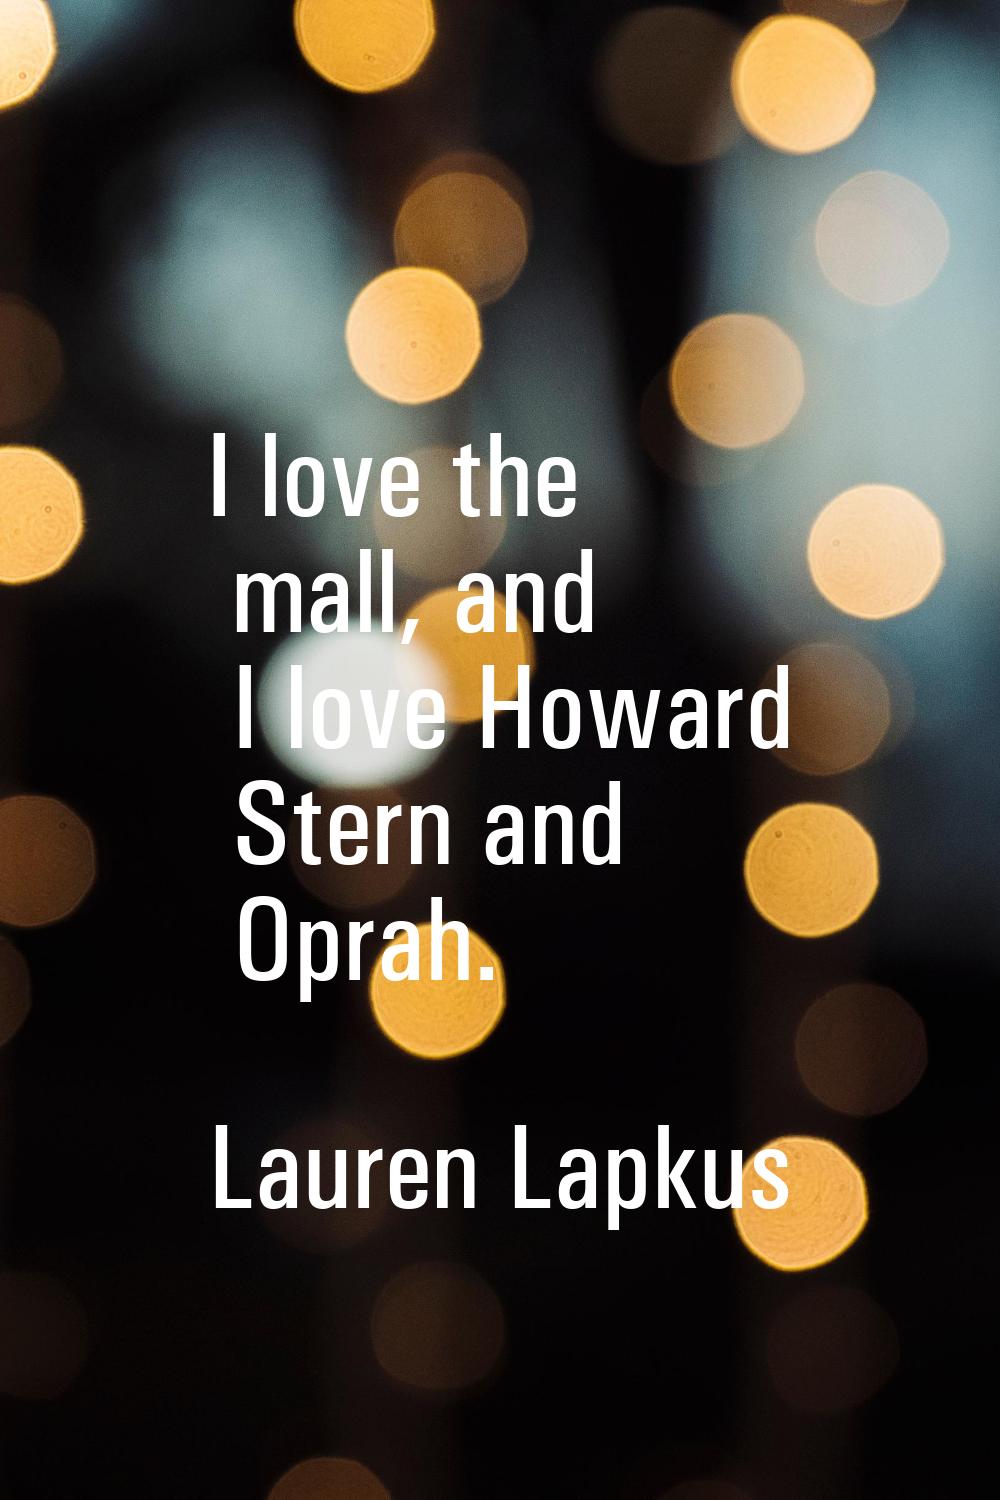 I love the mall, and I love Howard Stern and Oprah.